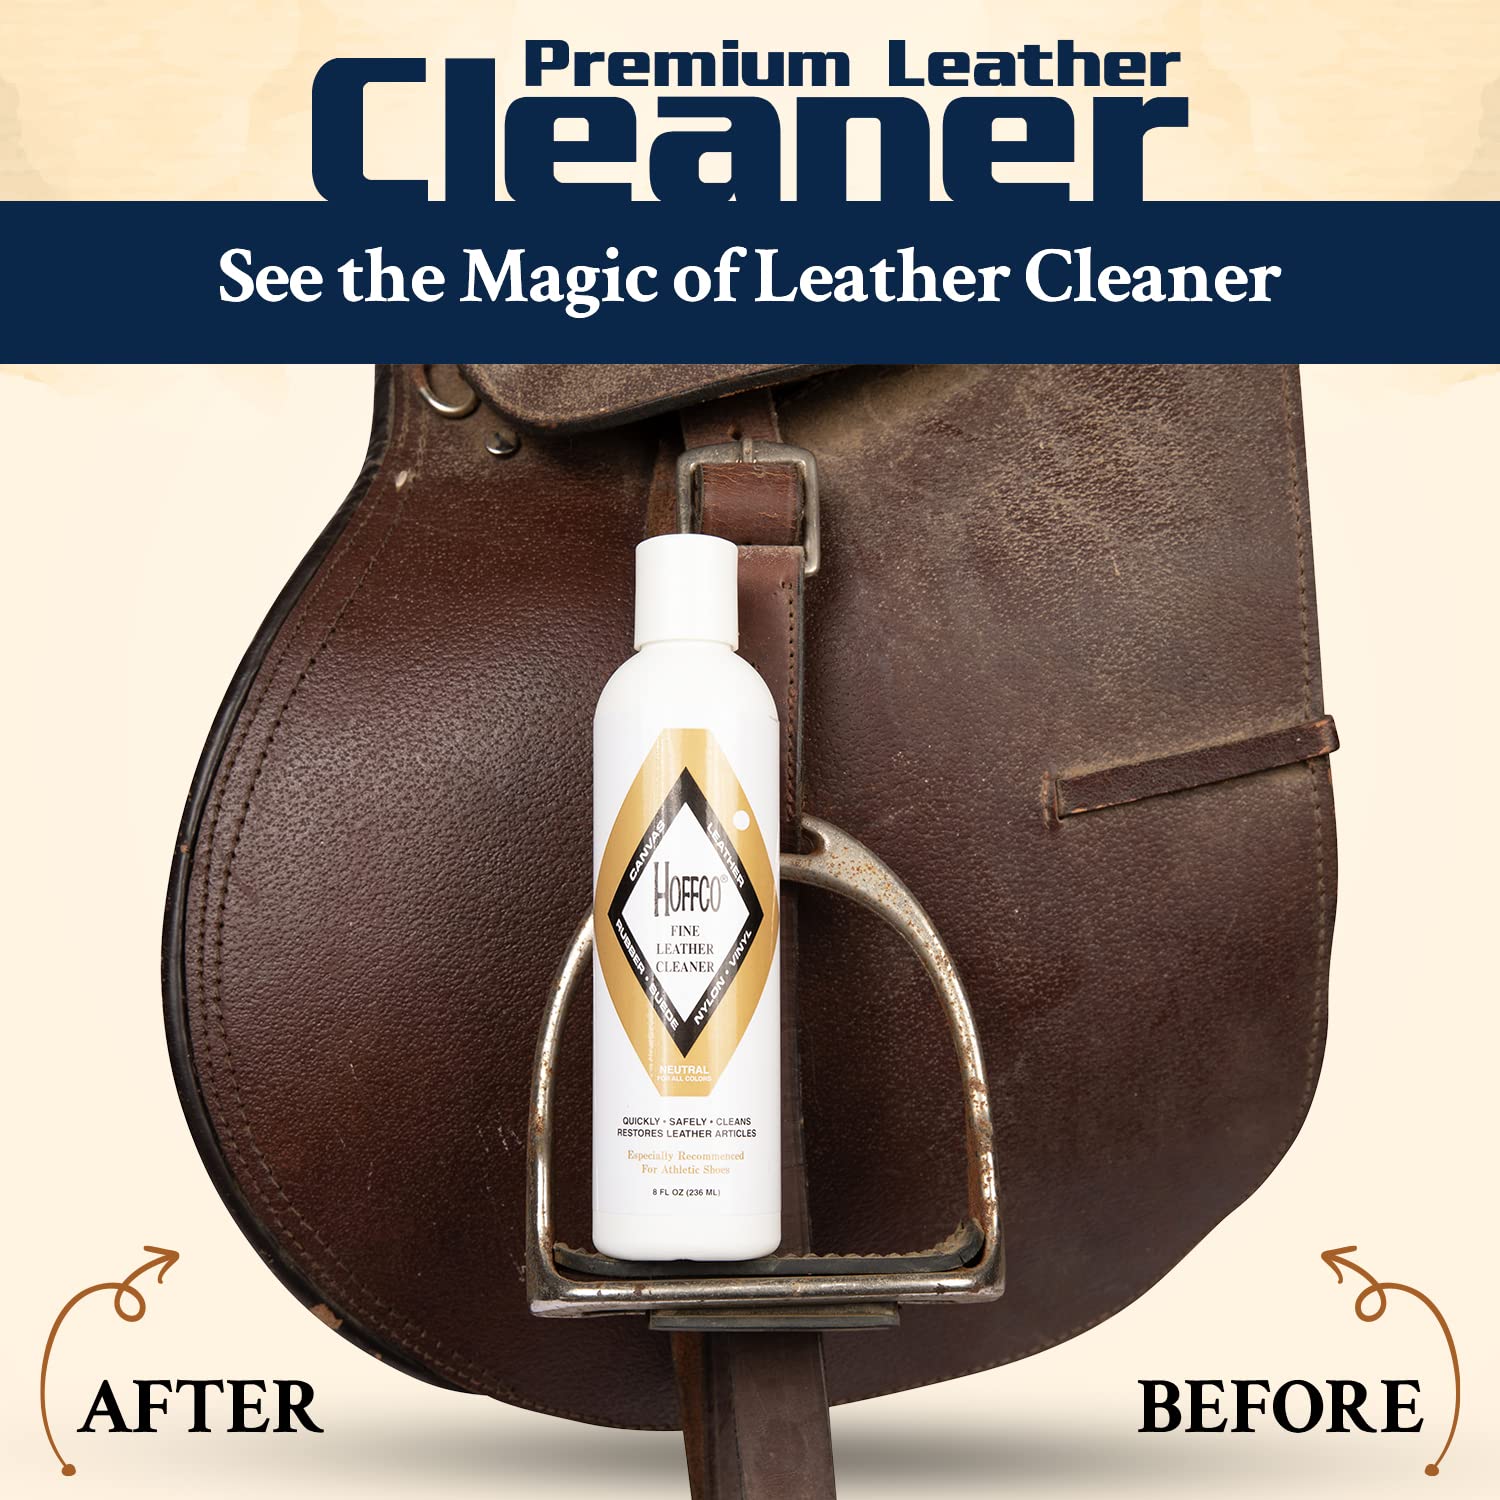 VENETIAN Premium Leather Cleaner - Safe & Effective for Boots, Shoes, Bags, Furniture, and More - 8oz Made in USA Since 1907